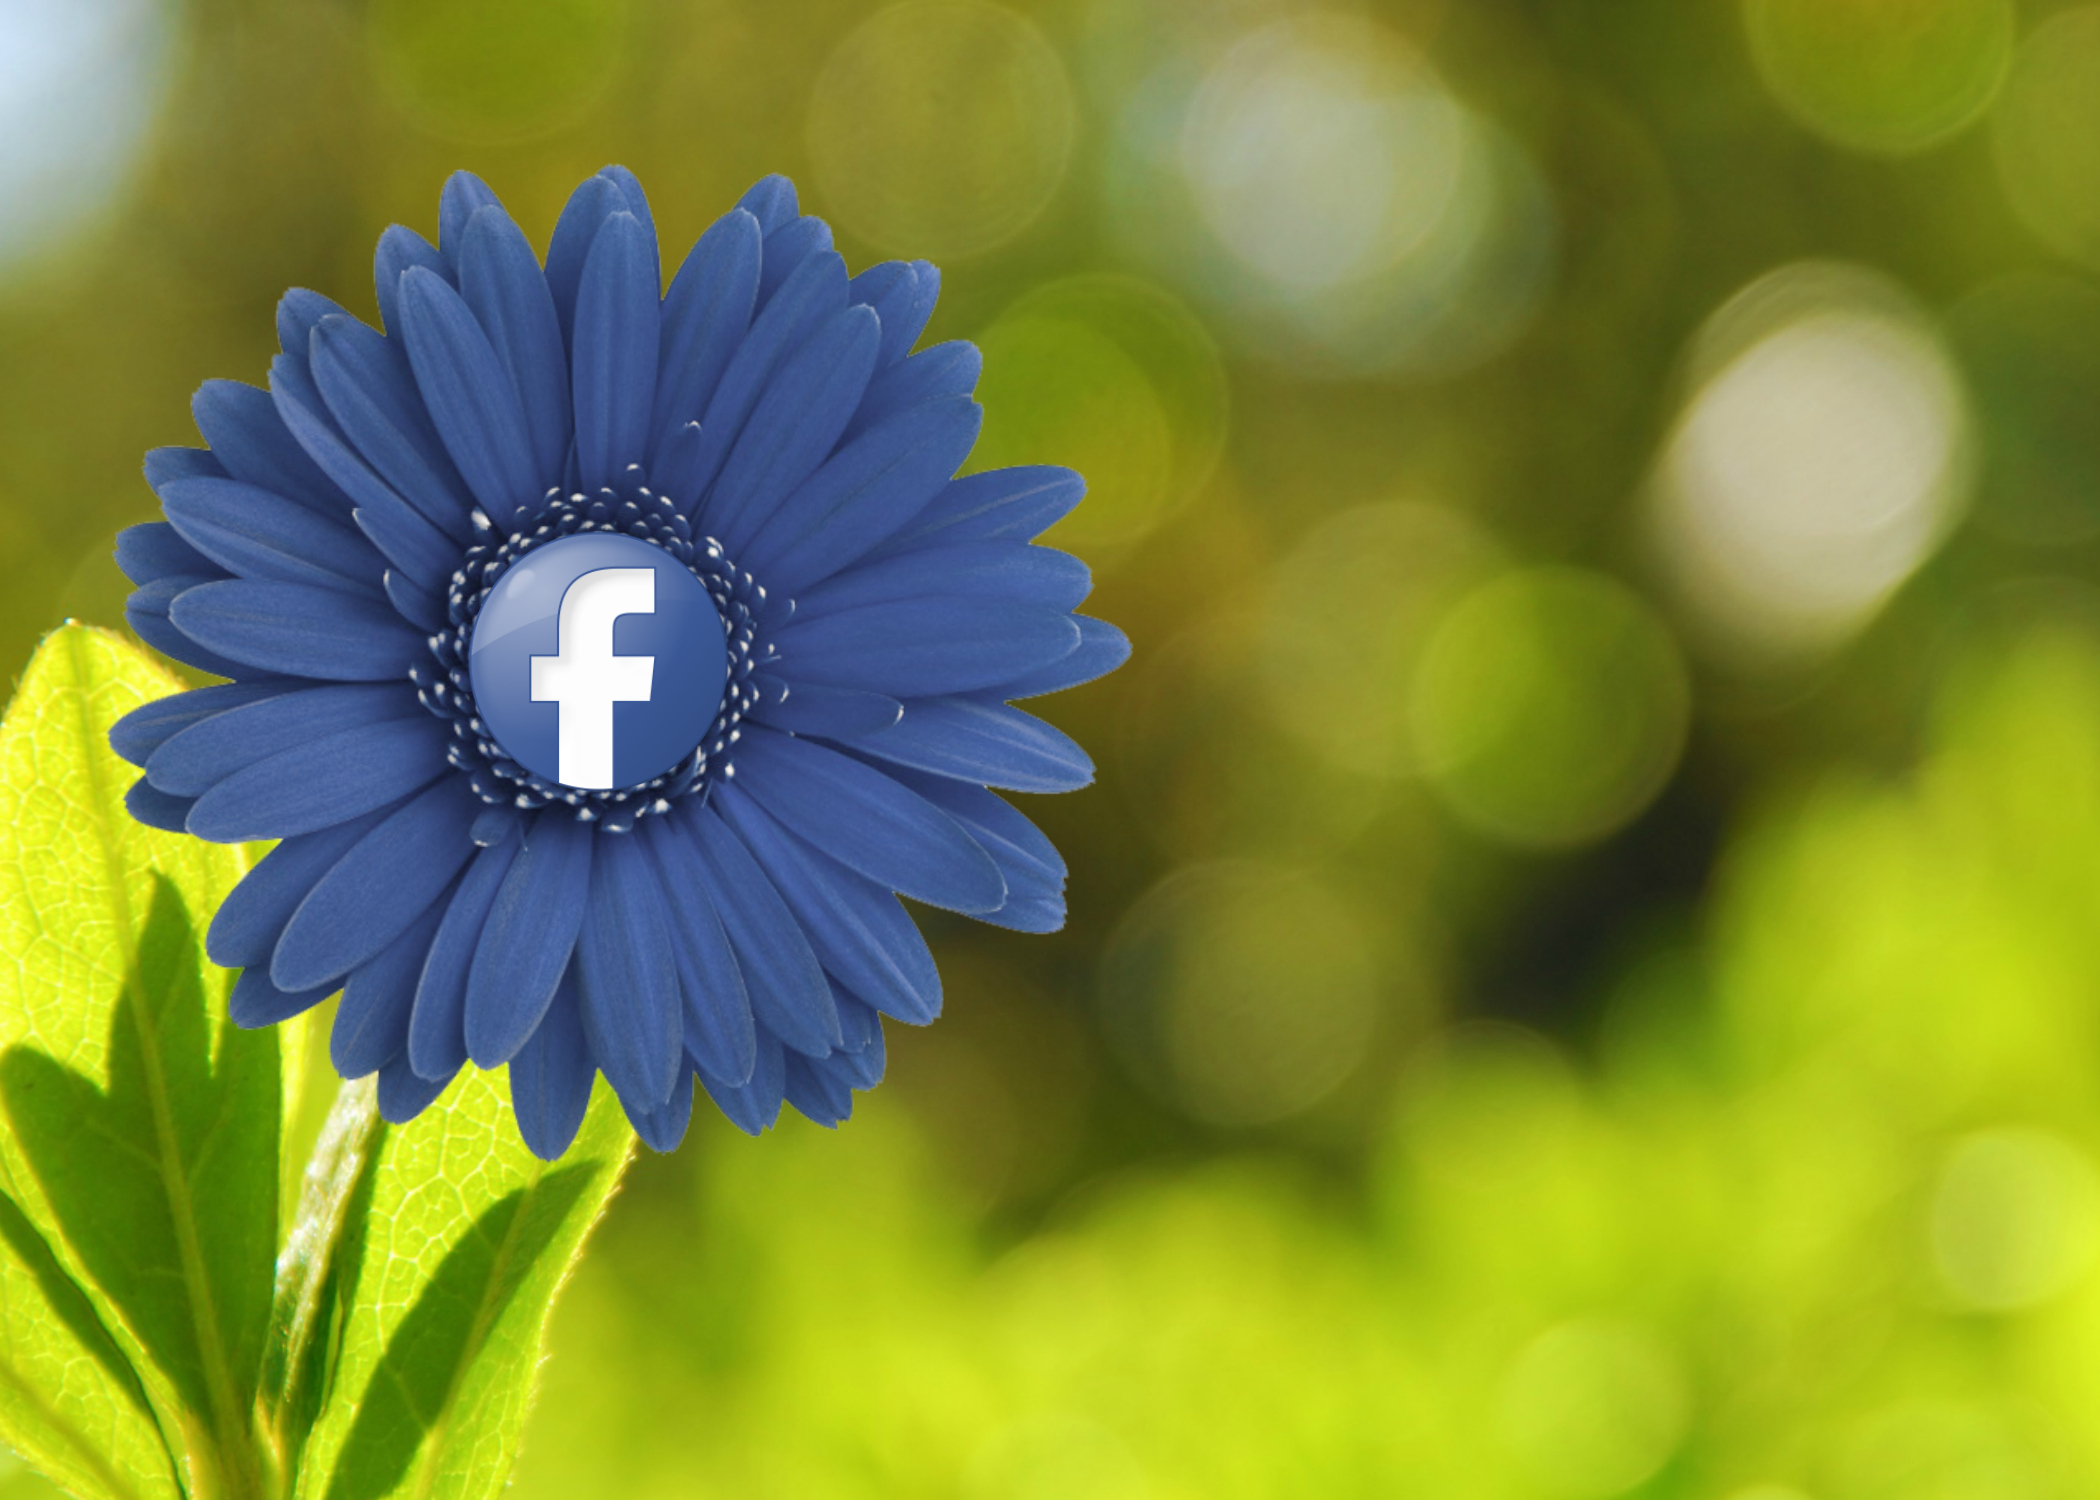 A blue flower with the Facebook icon as its center, published to 